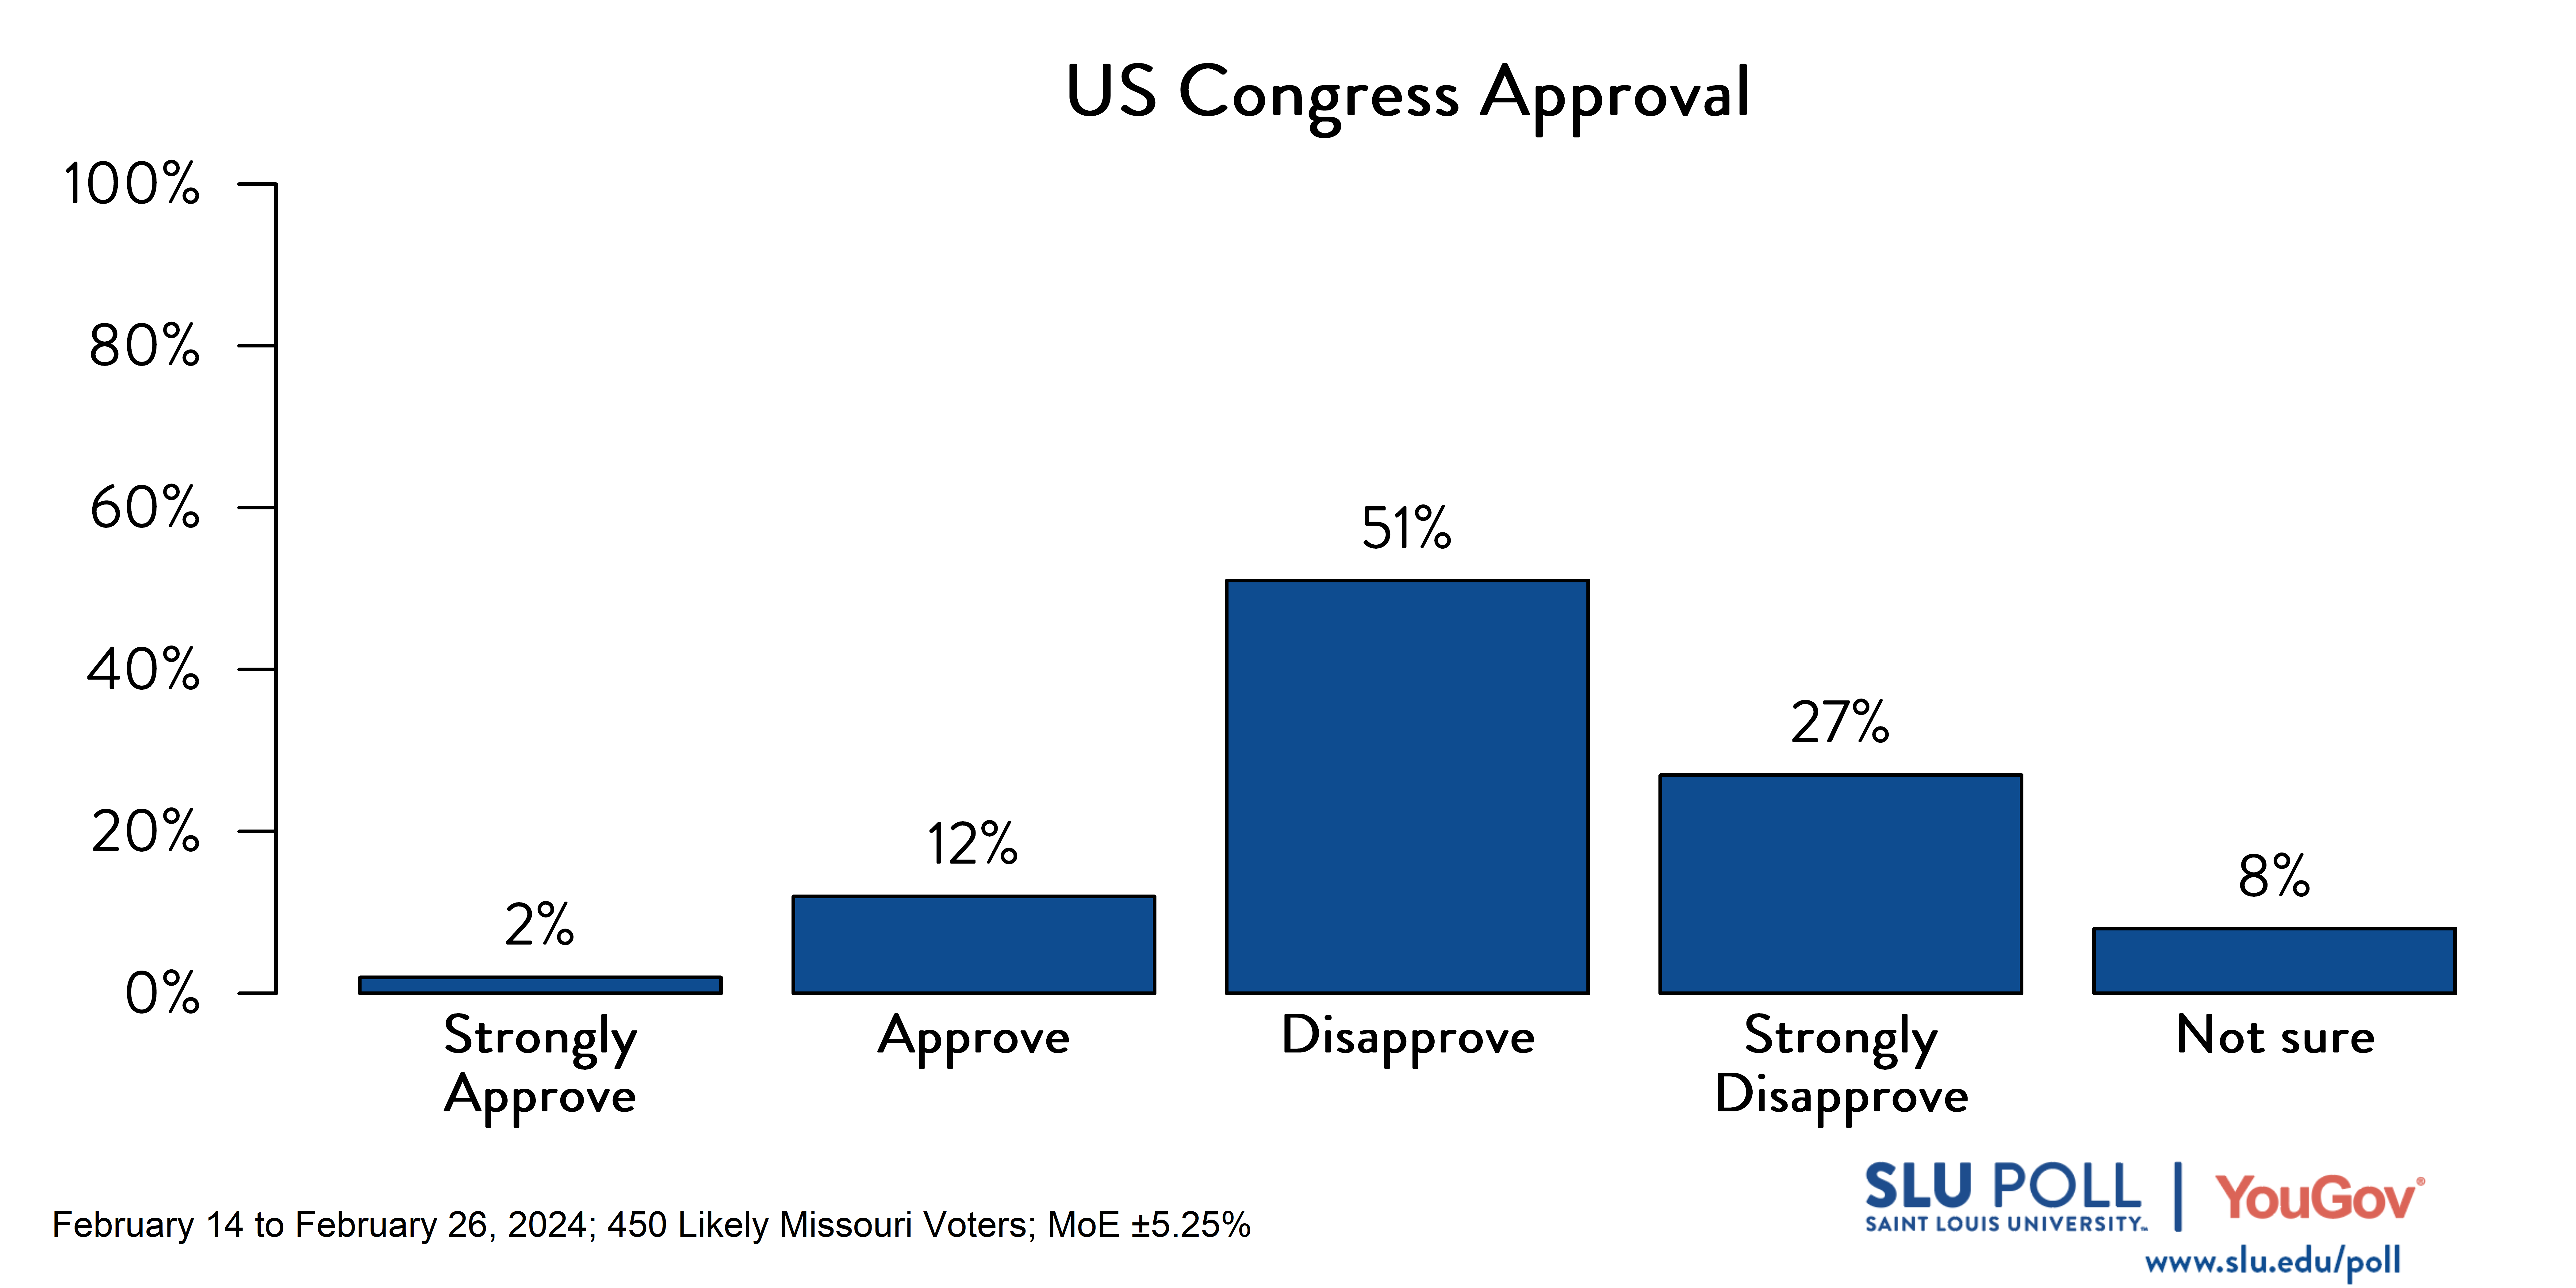 Bar graph of SLU/YouGov Poll results for US Congress approval question. Results in caption